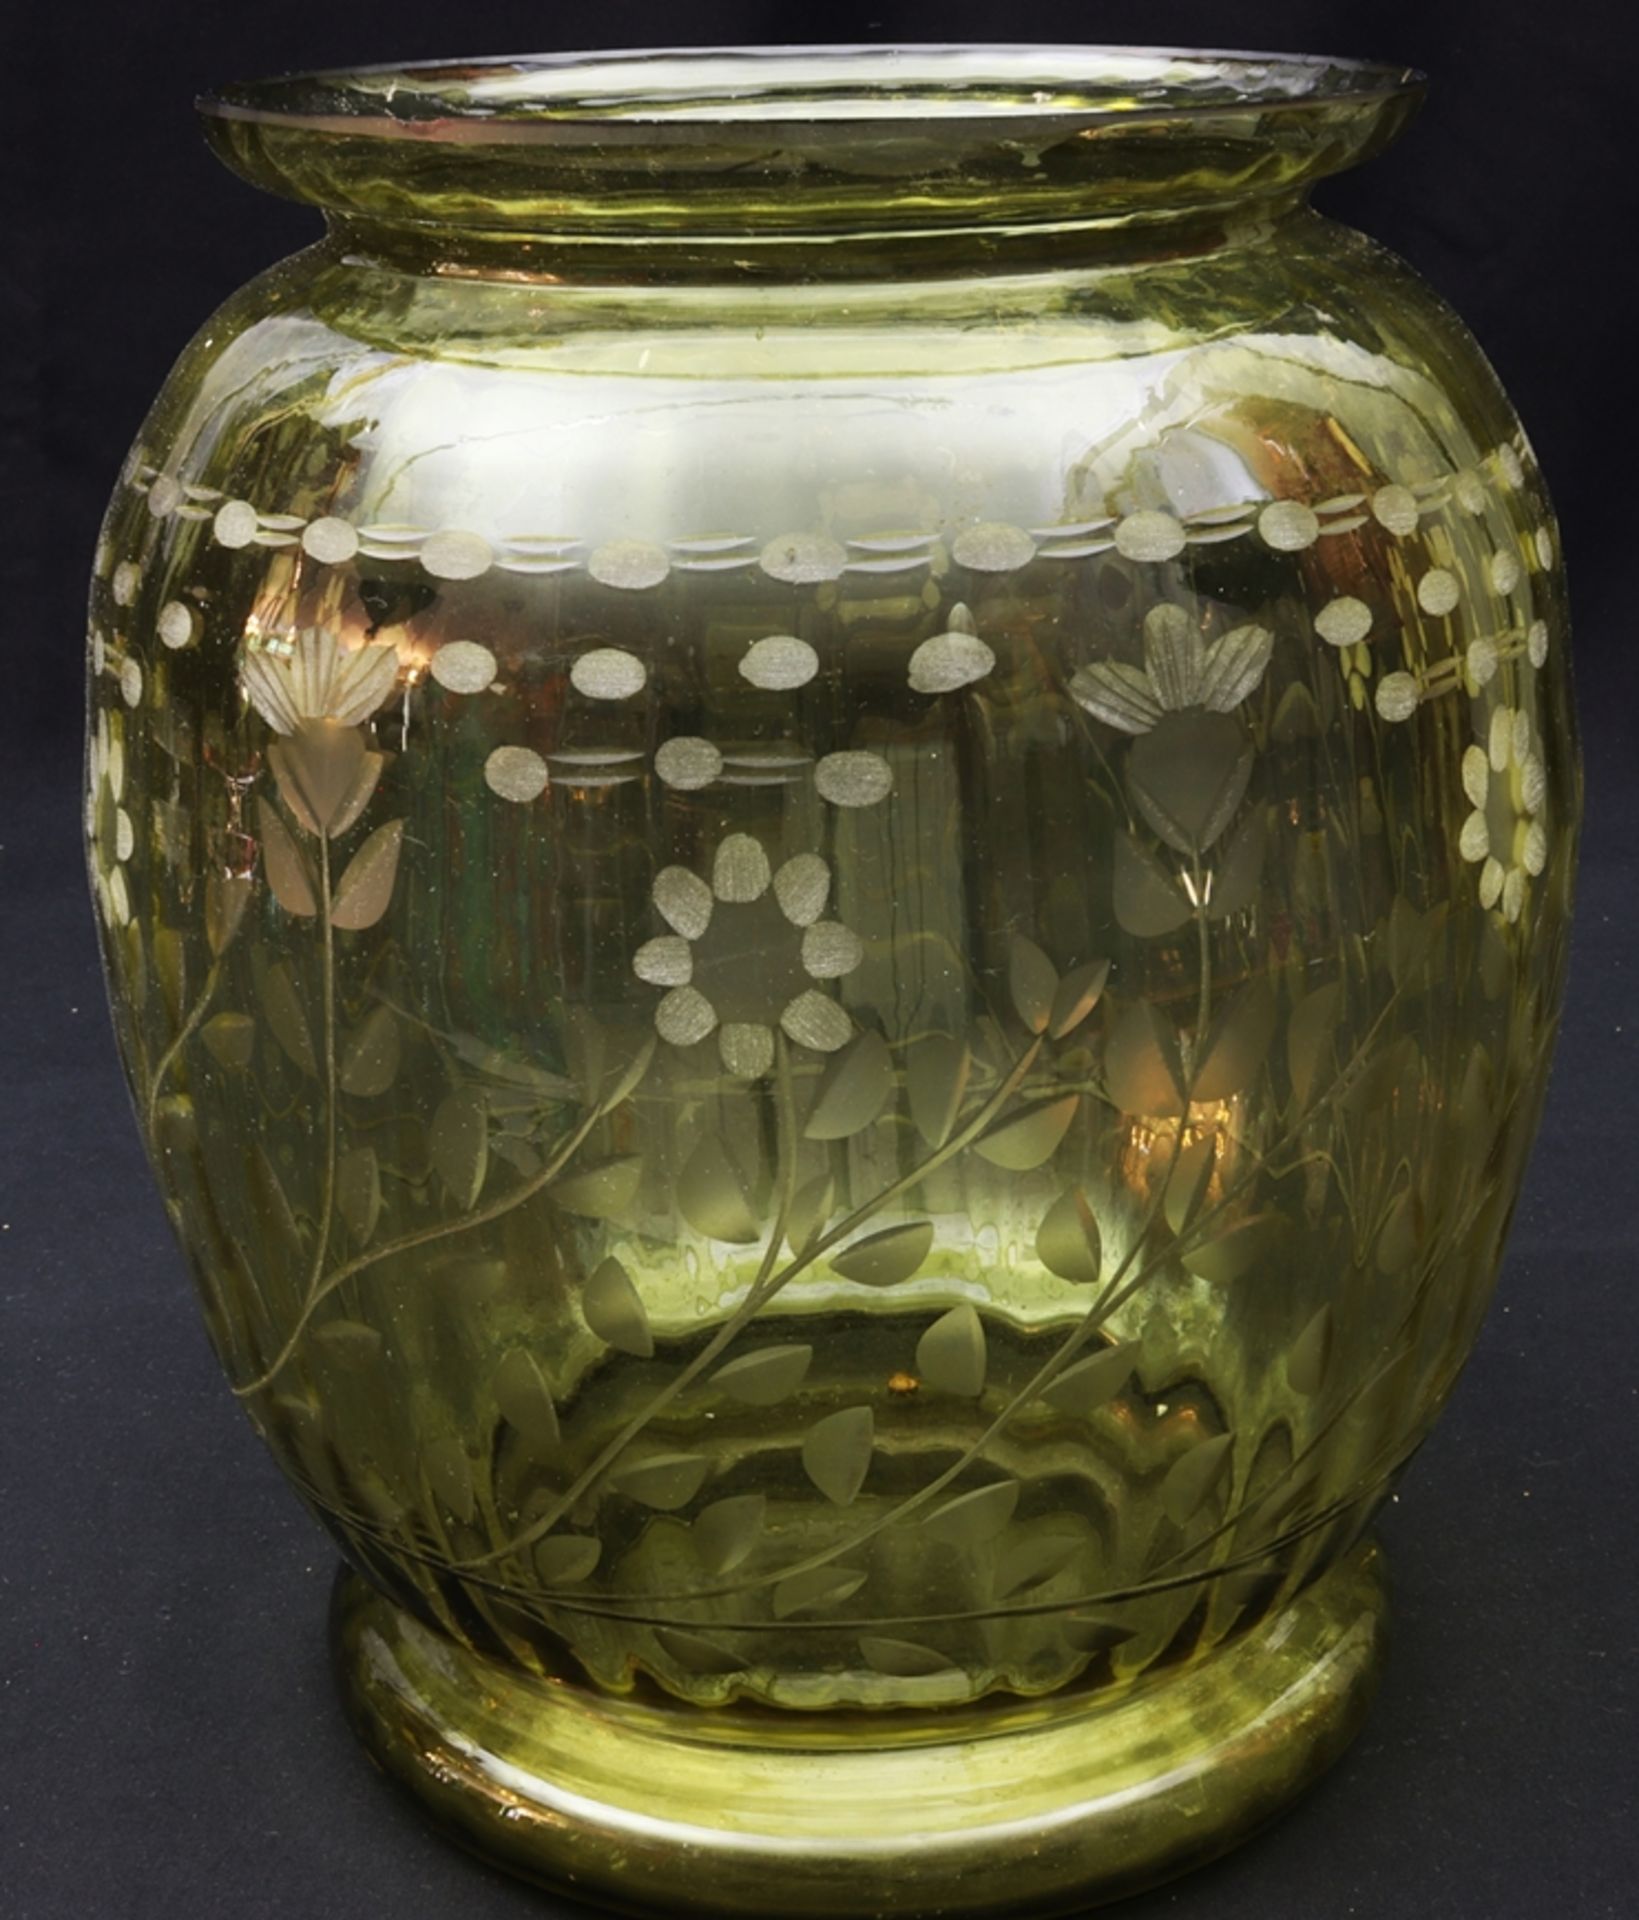 Large spherical bellied vase, Bohemia 2nd half of the 19th cent, German - Image 2 of 3